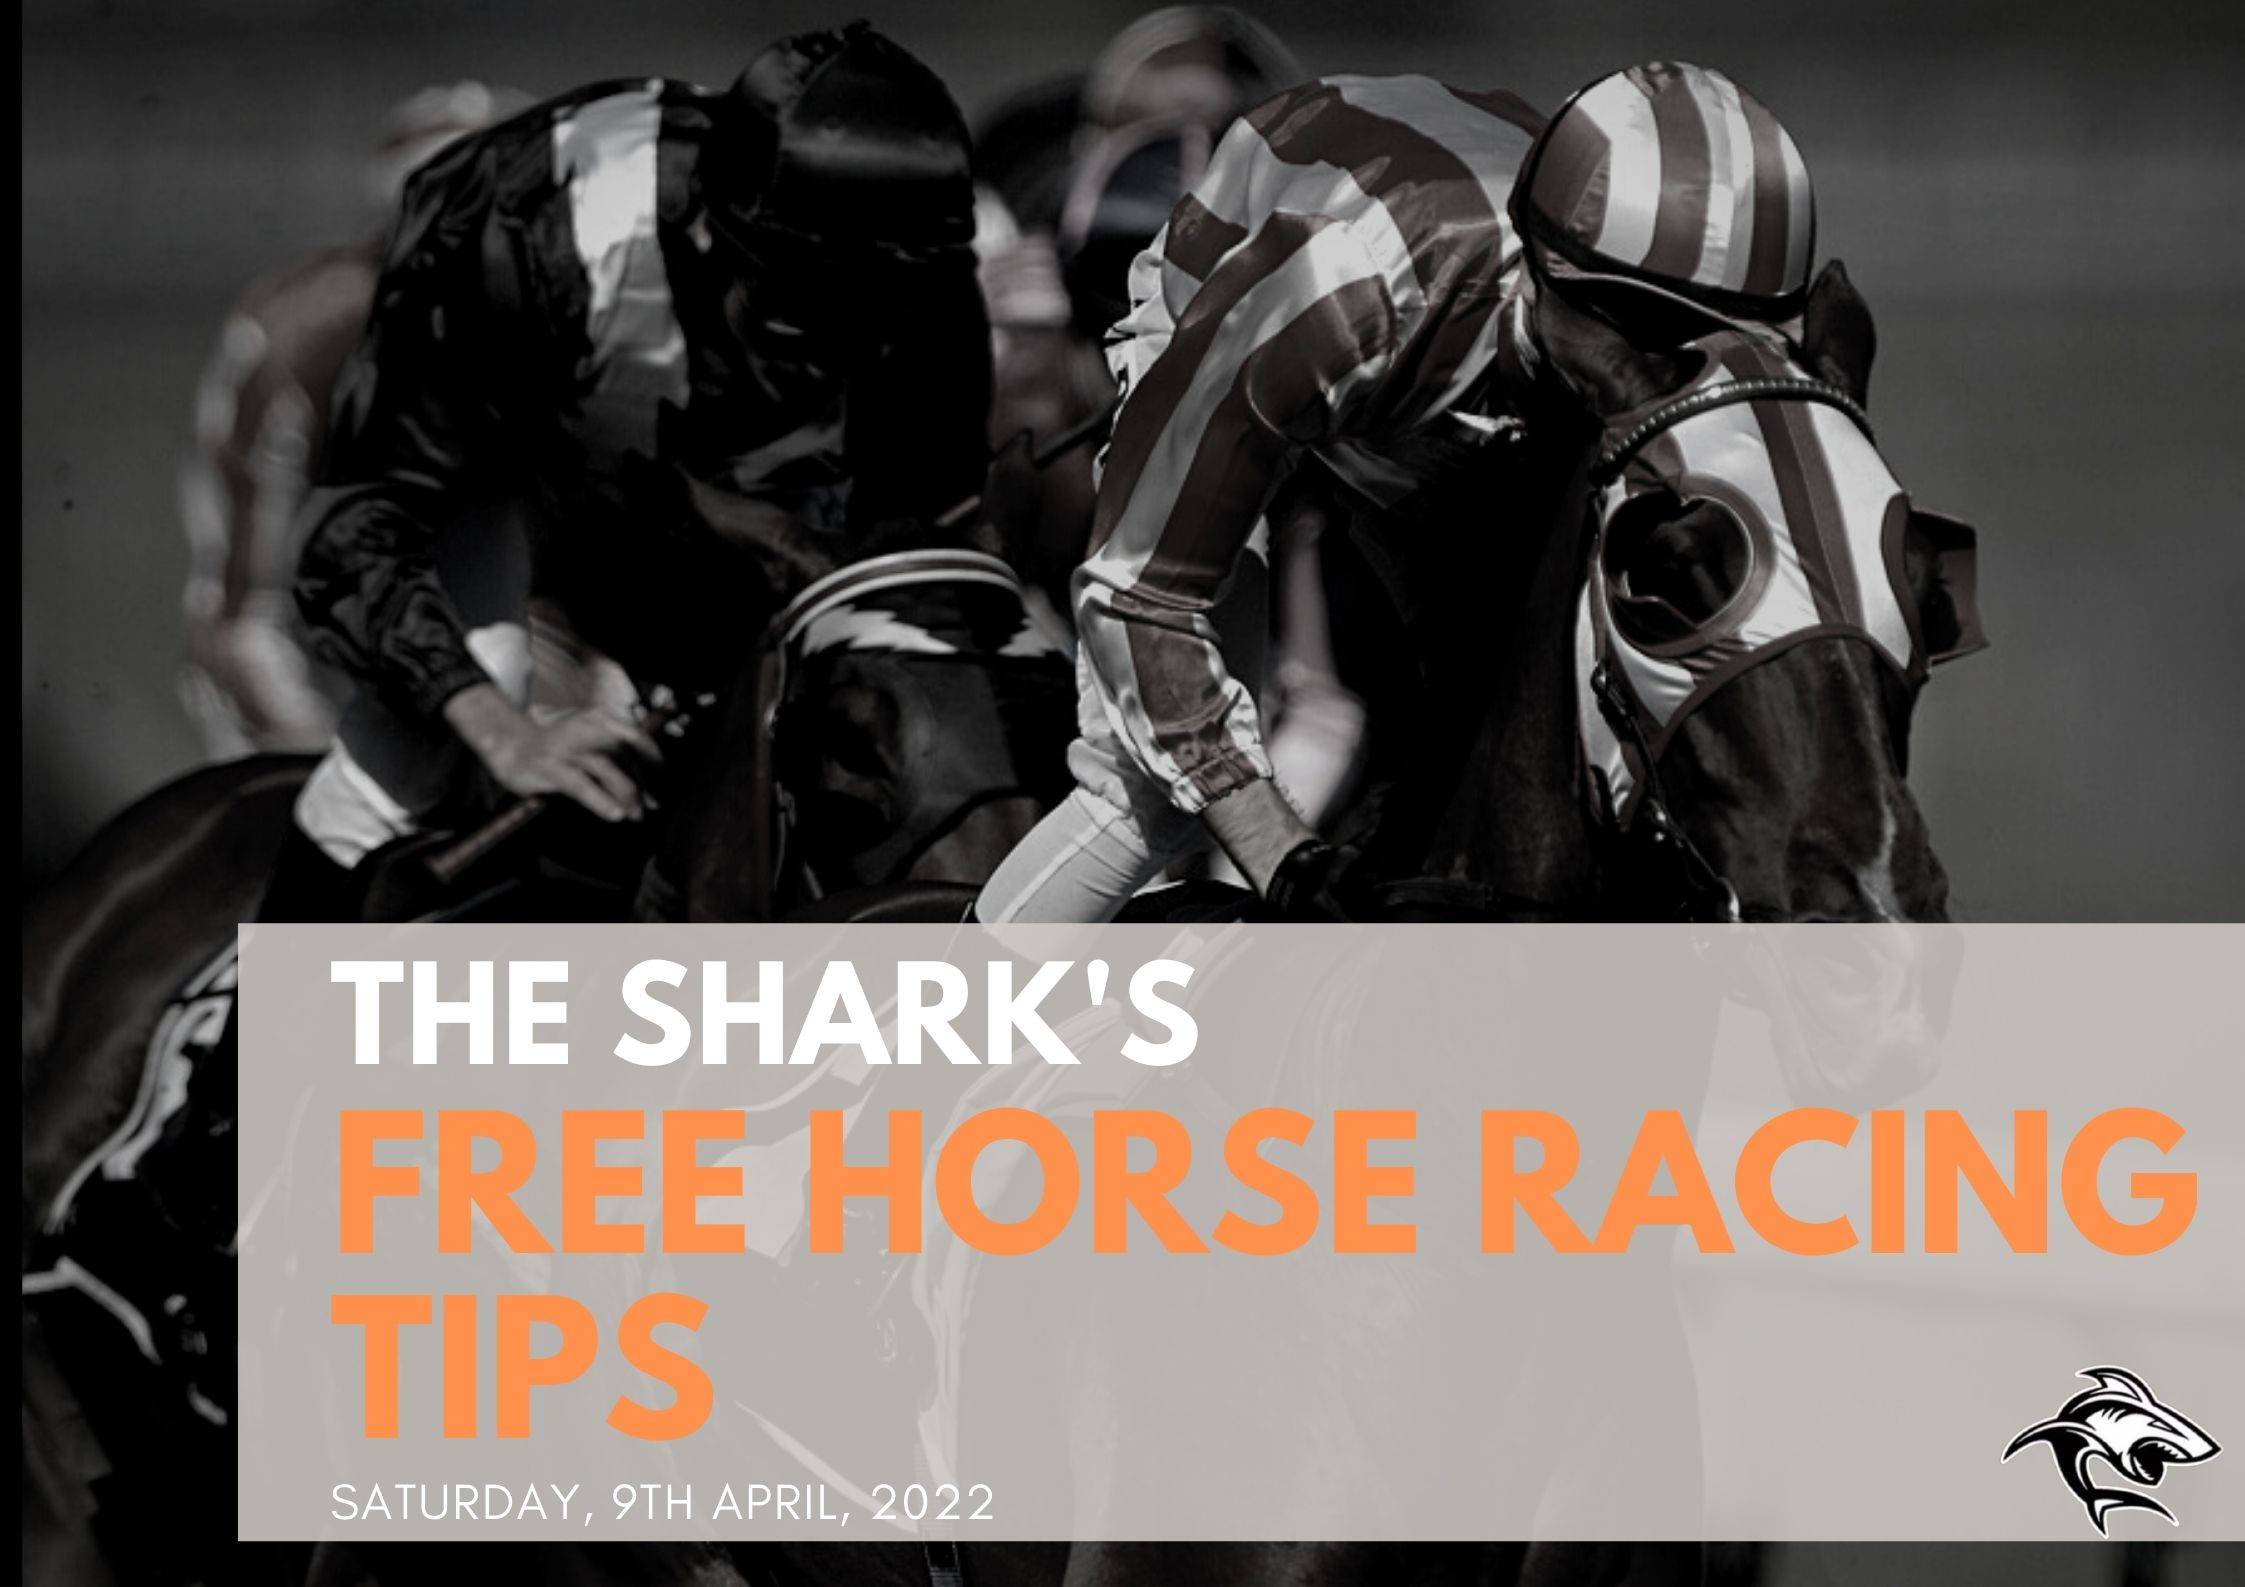 Free Horse Racing Tips - 9th Apr